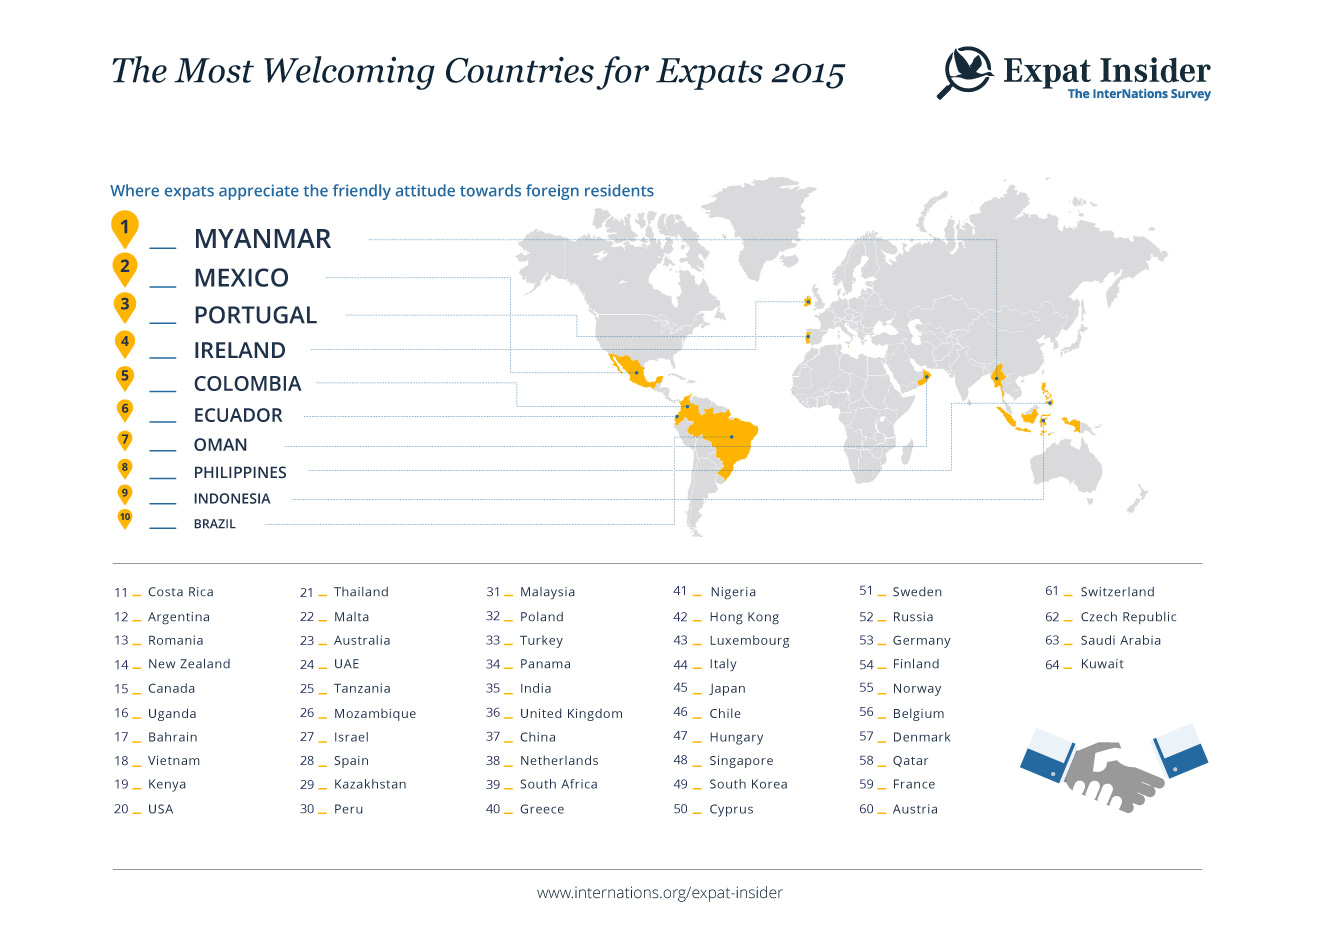 Most Welcoming Countries for Expats 2015 - infographic